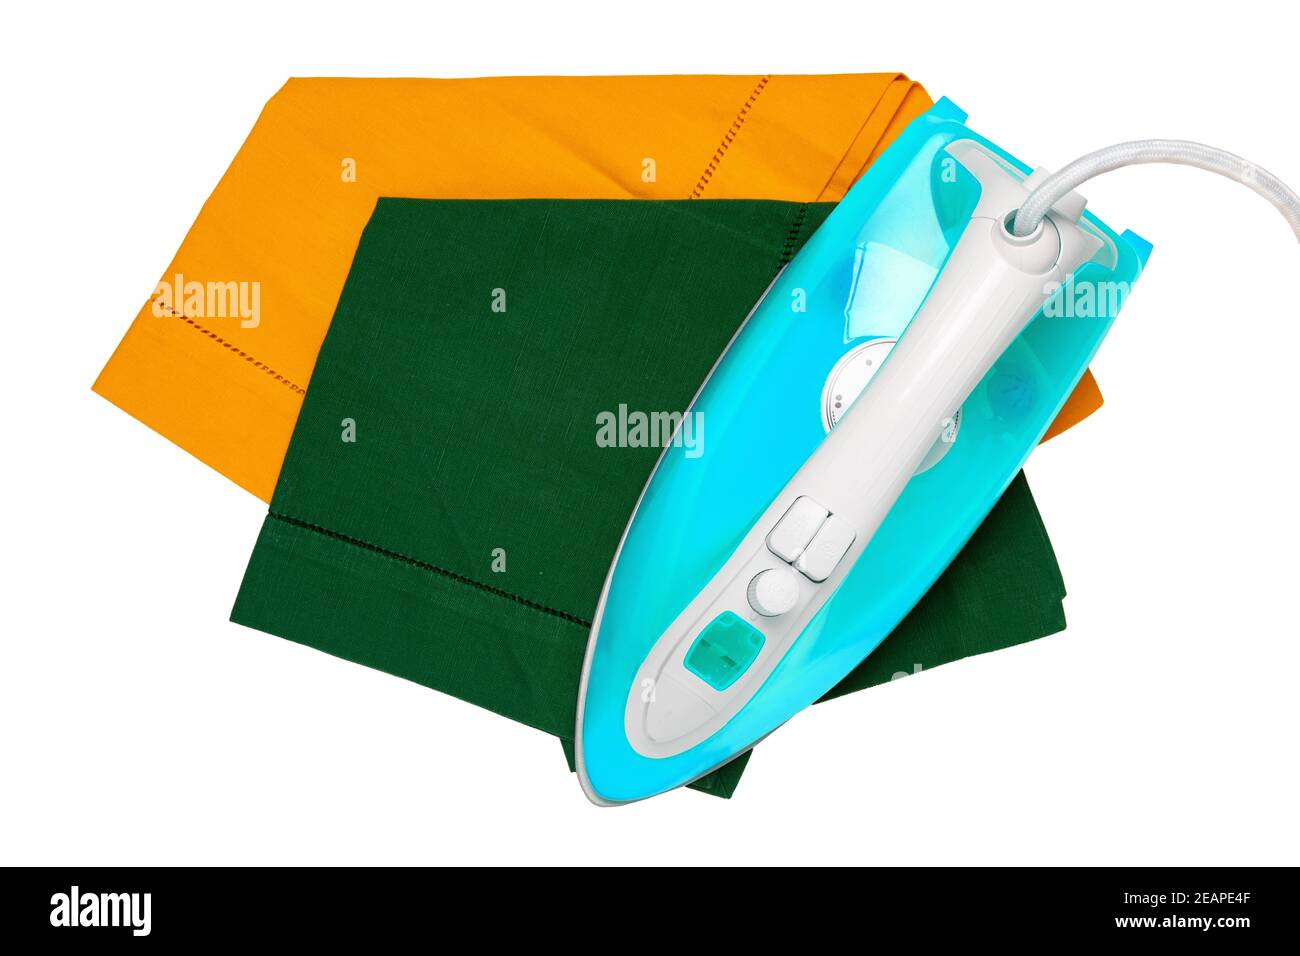 Top view of a modern electric blue iron ironing a green and a yellow cloth napkin isolated on a white background. Housework concept. Stock Photo